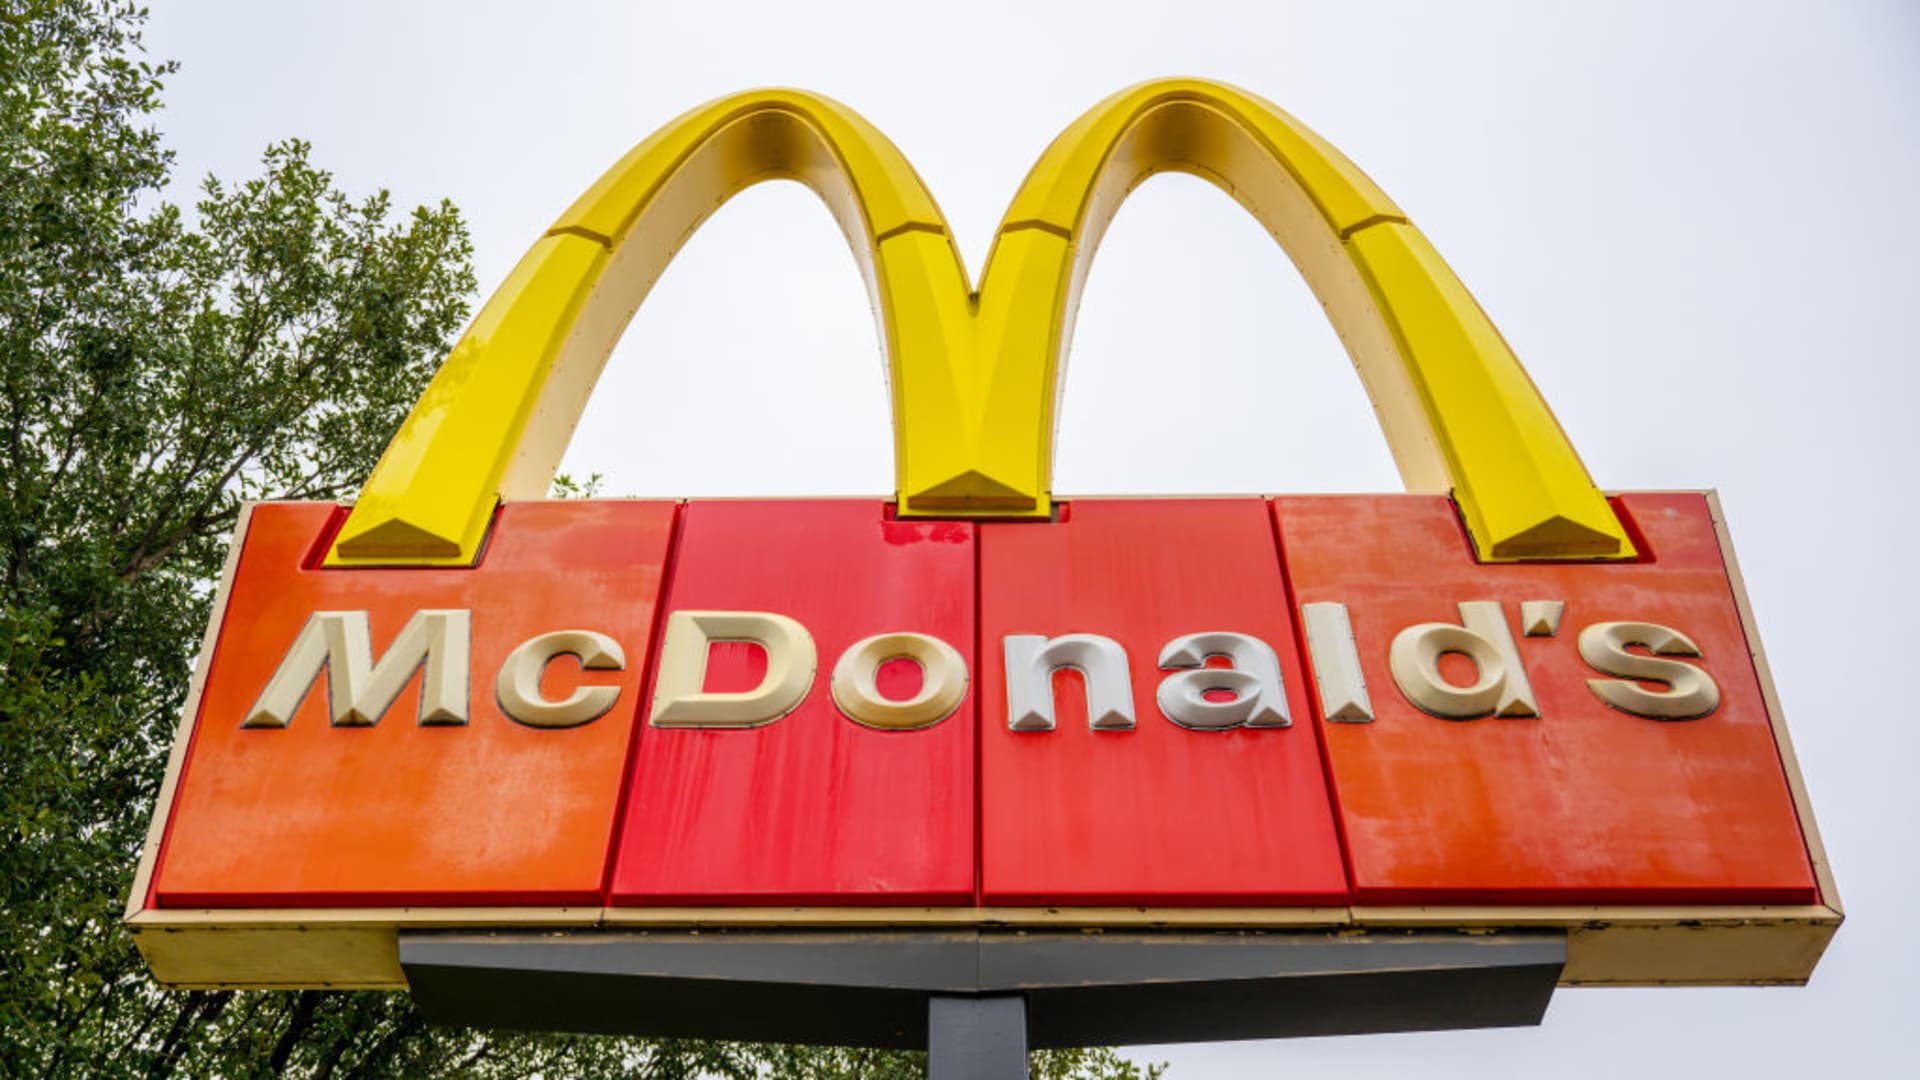 McDonald’s aims to open nearly 9,000 restaurants, add 100 million loyalty members by 2027